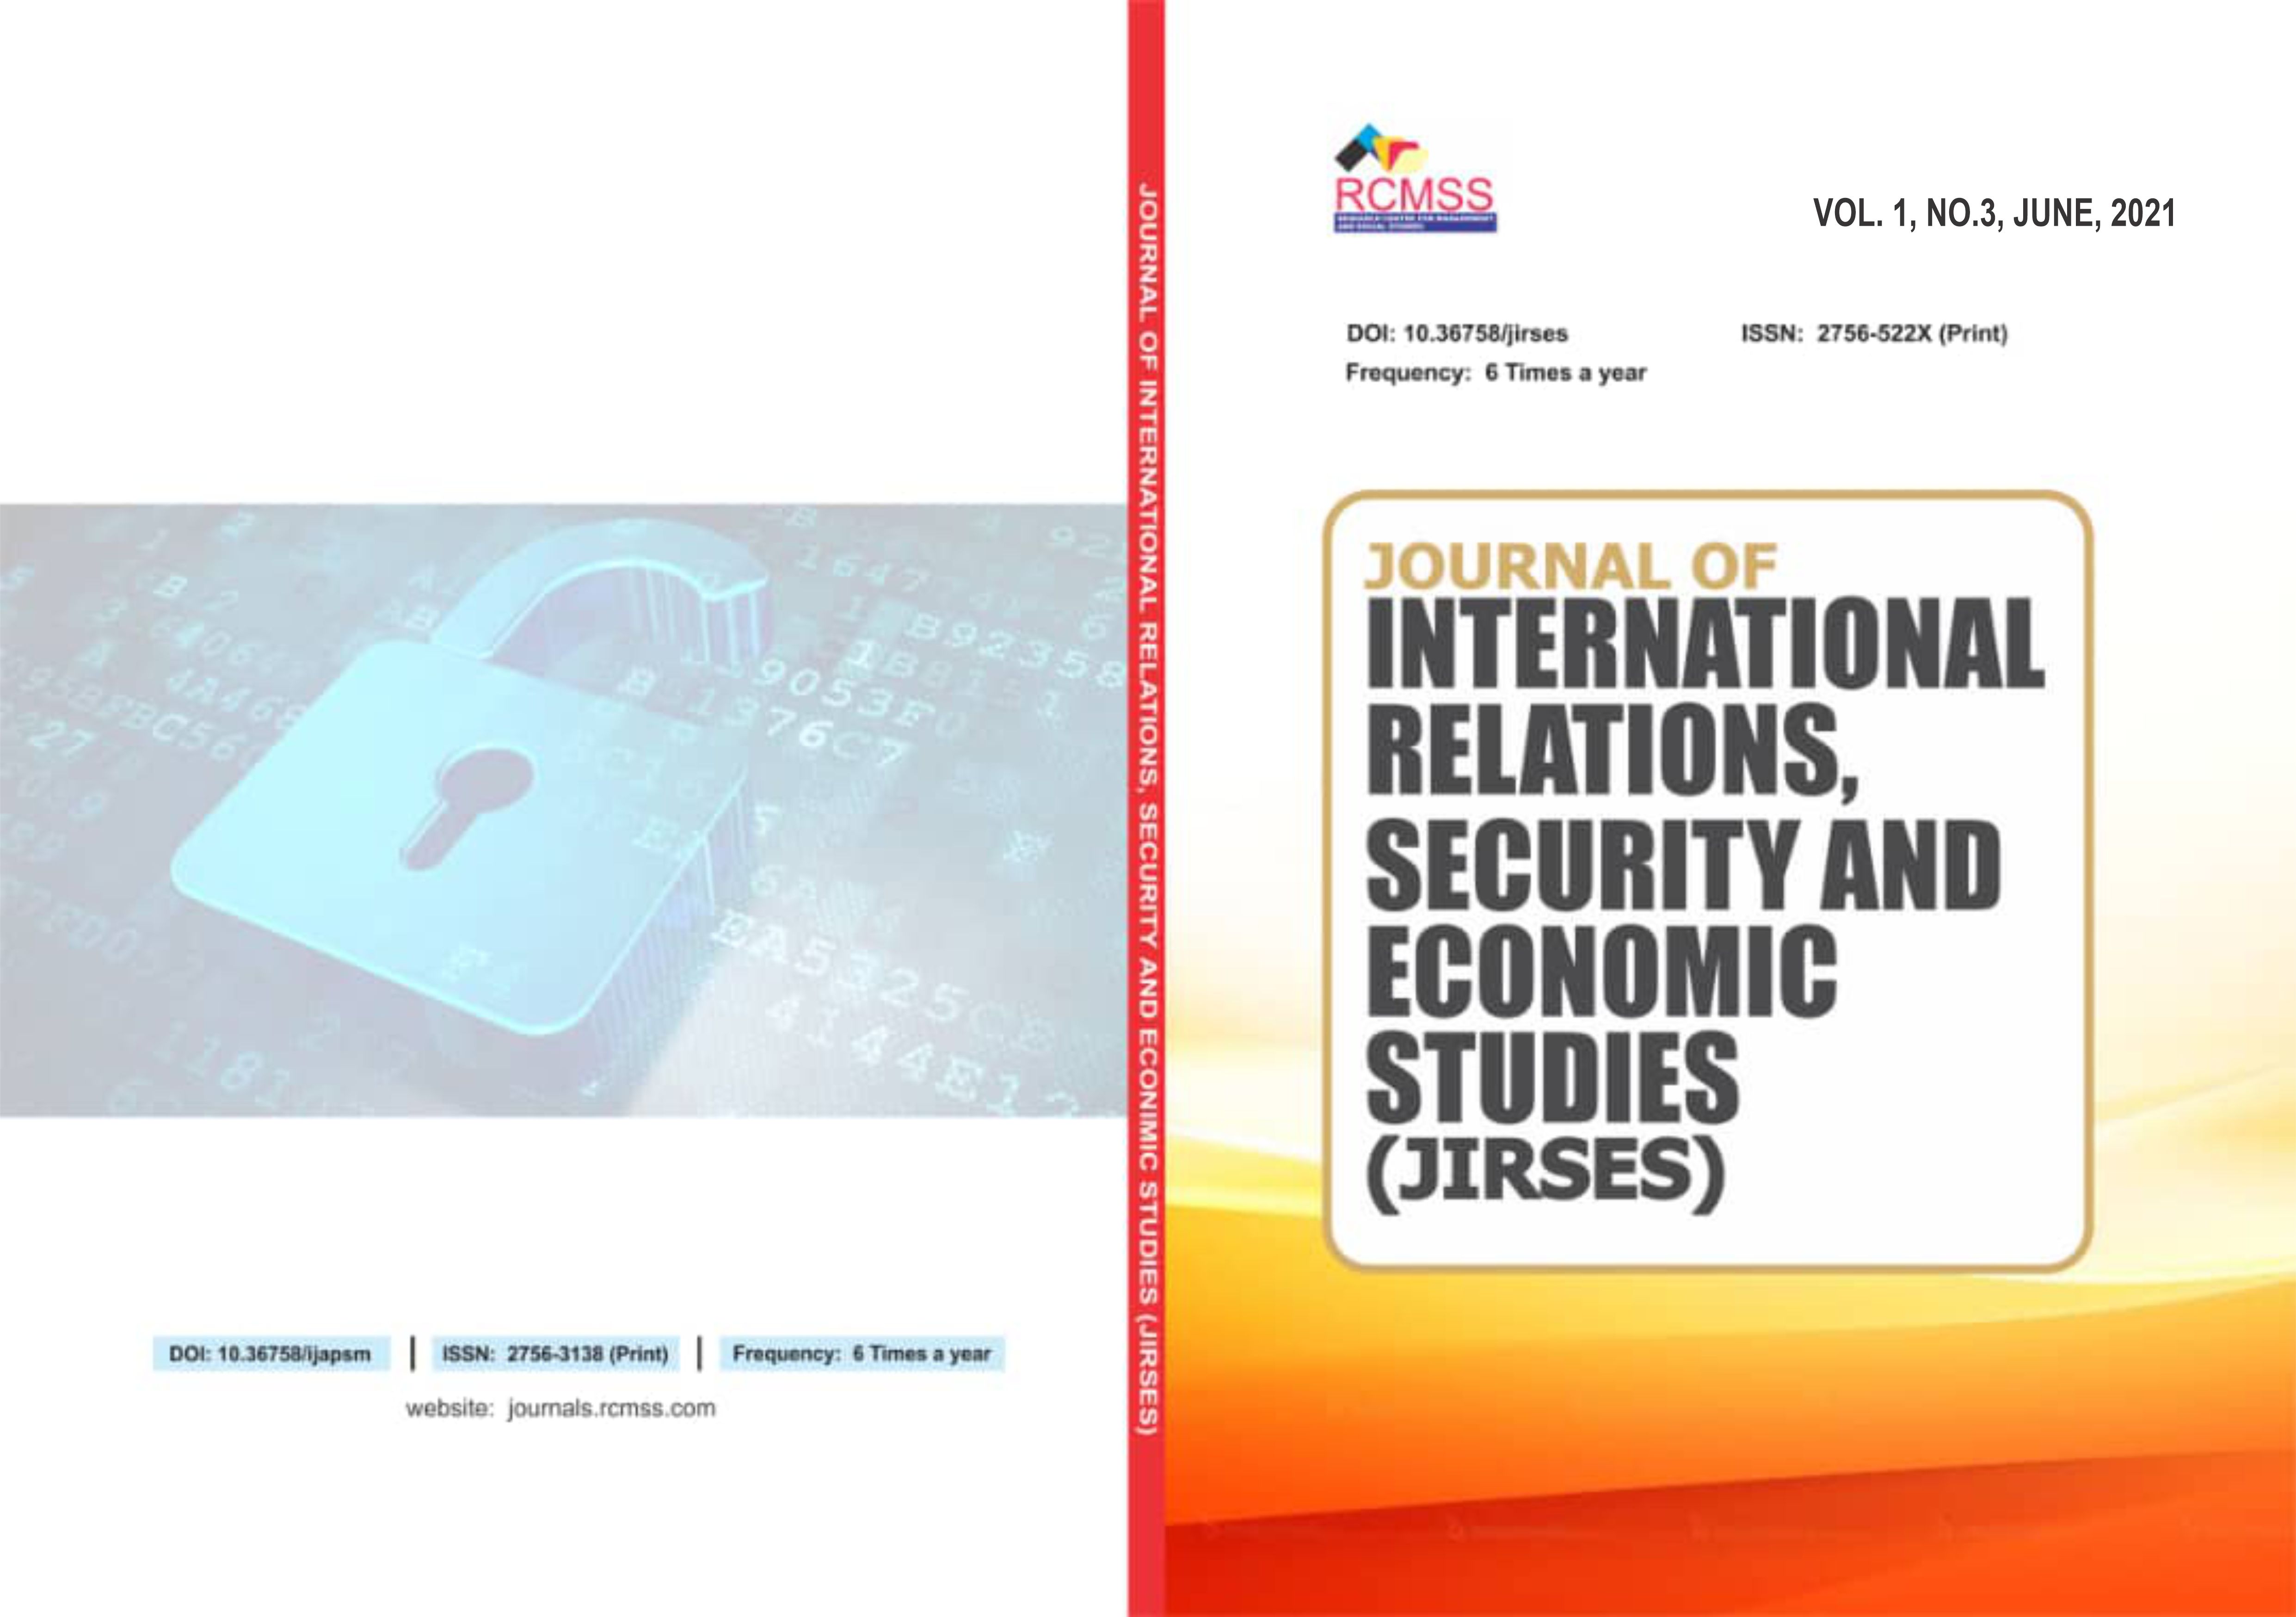 					View Vol. 1 No. 3 (2021): Journal of International Relations, Security and Economic Studies (JIRSES)
				